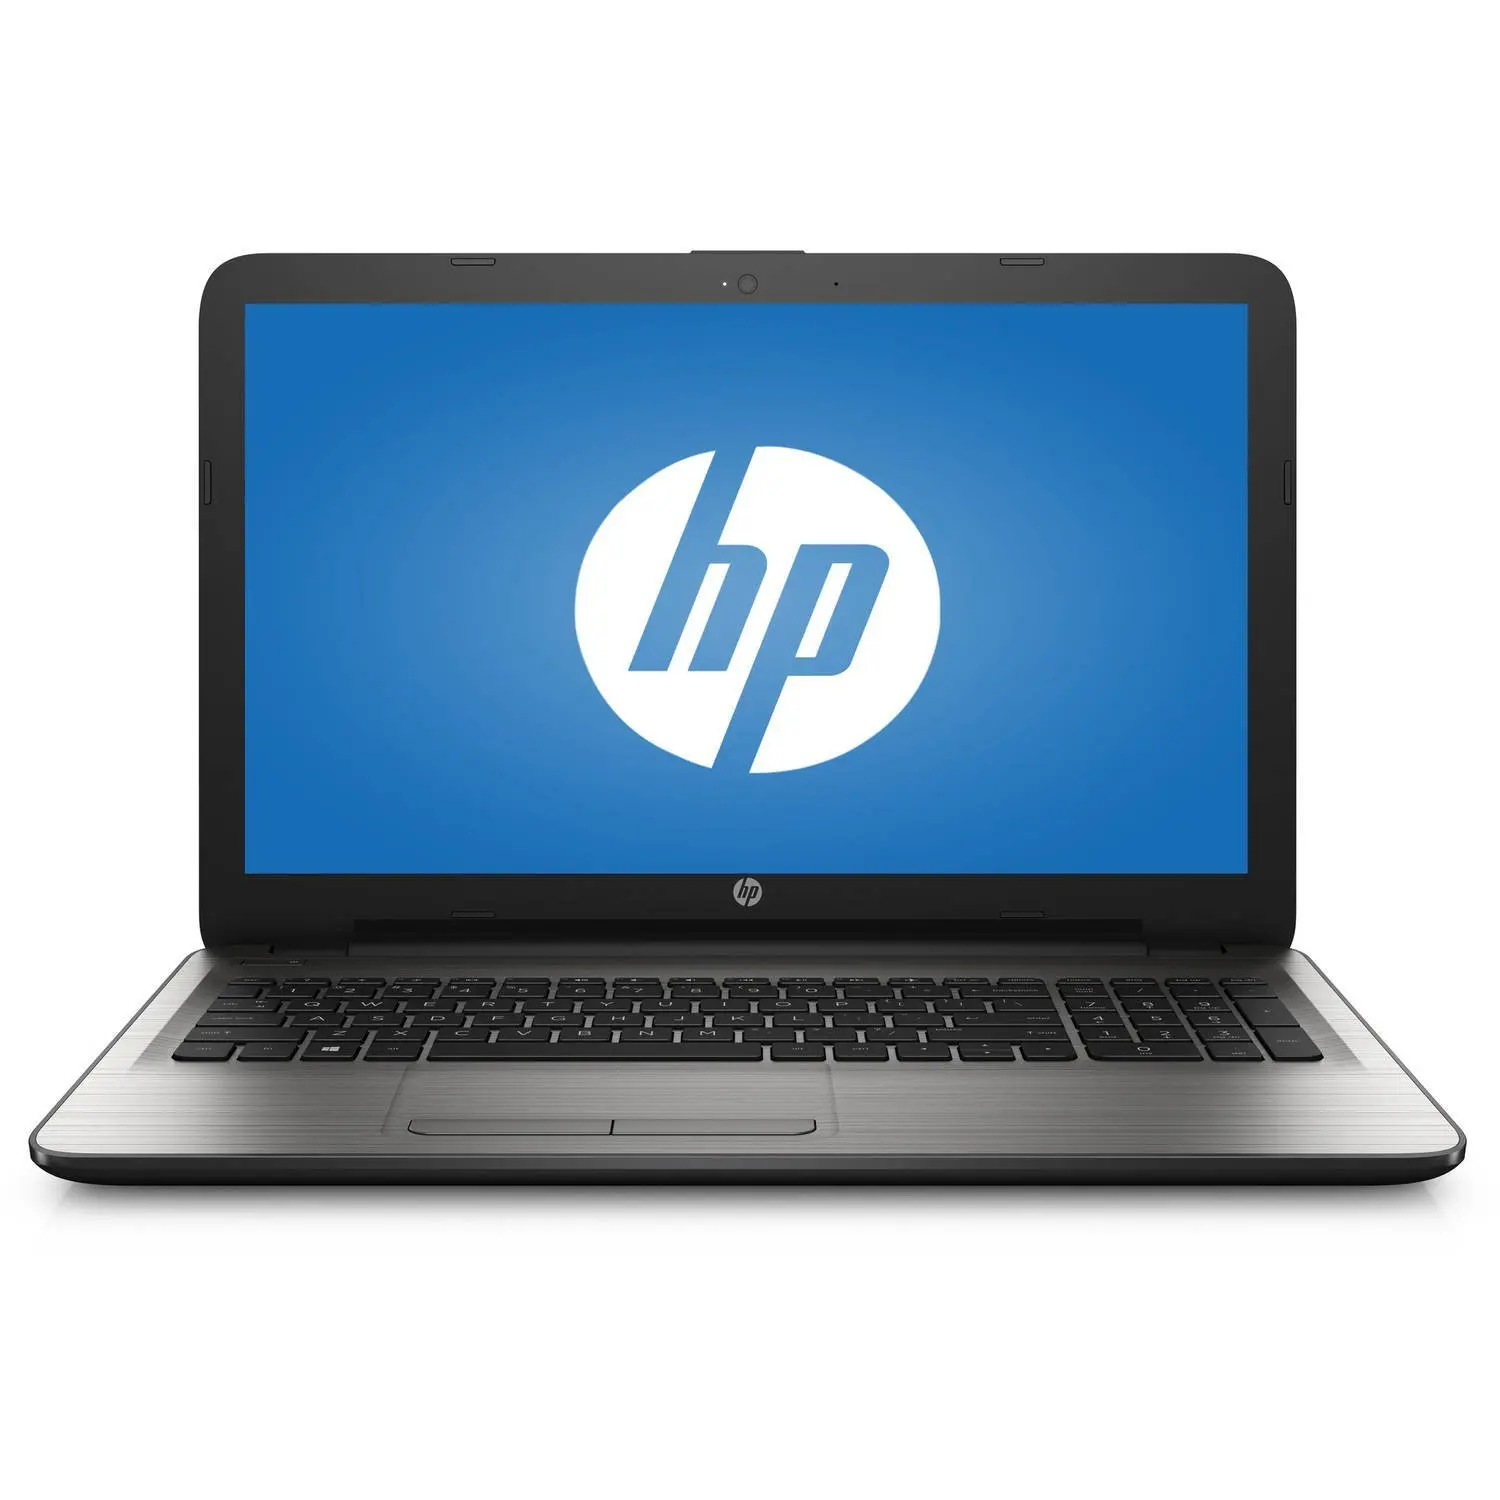 Cheap Price Of Laptop Core I3 In Pakistan Find Price Of Laptop Core I3